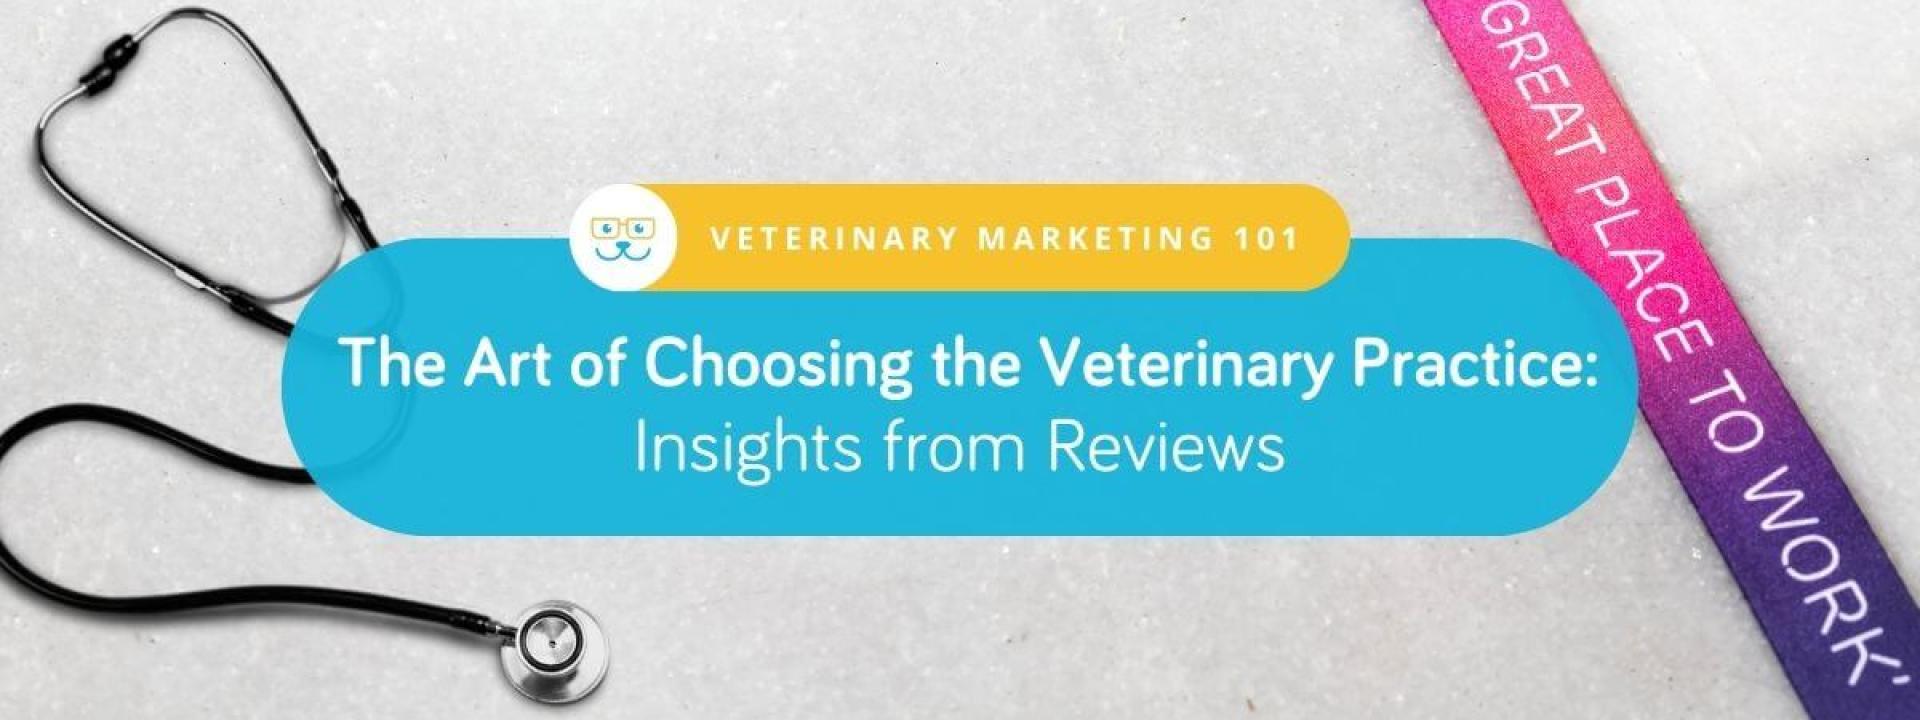 The Art of Choosing the Veterinary Practice: Insights from Reviews